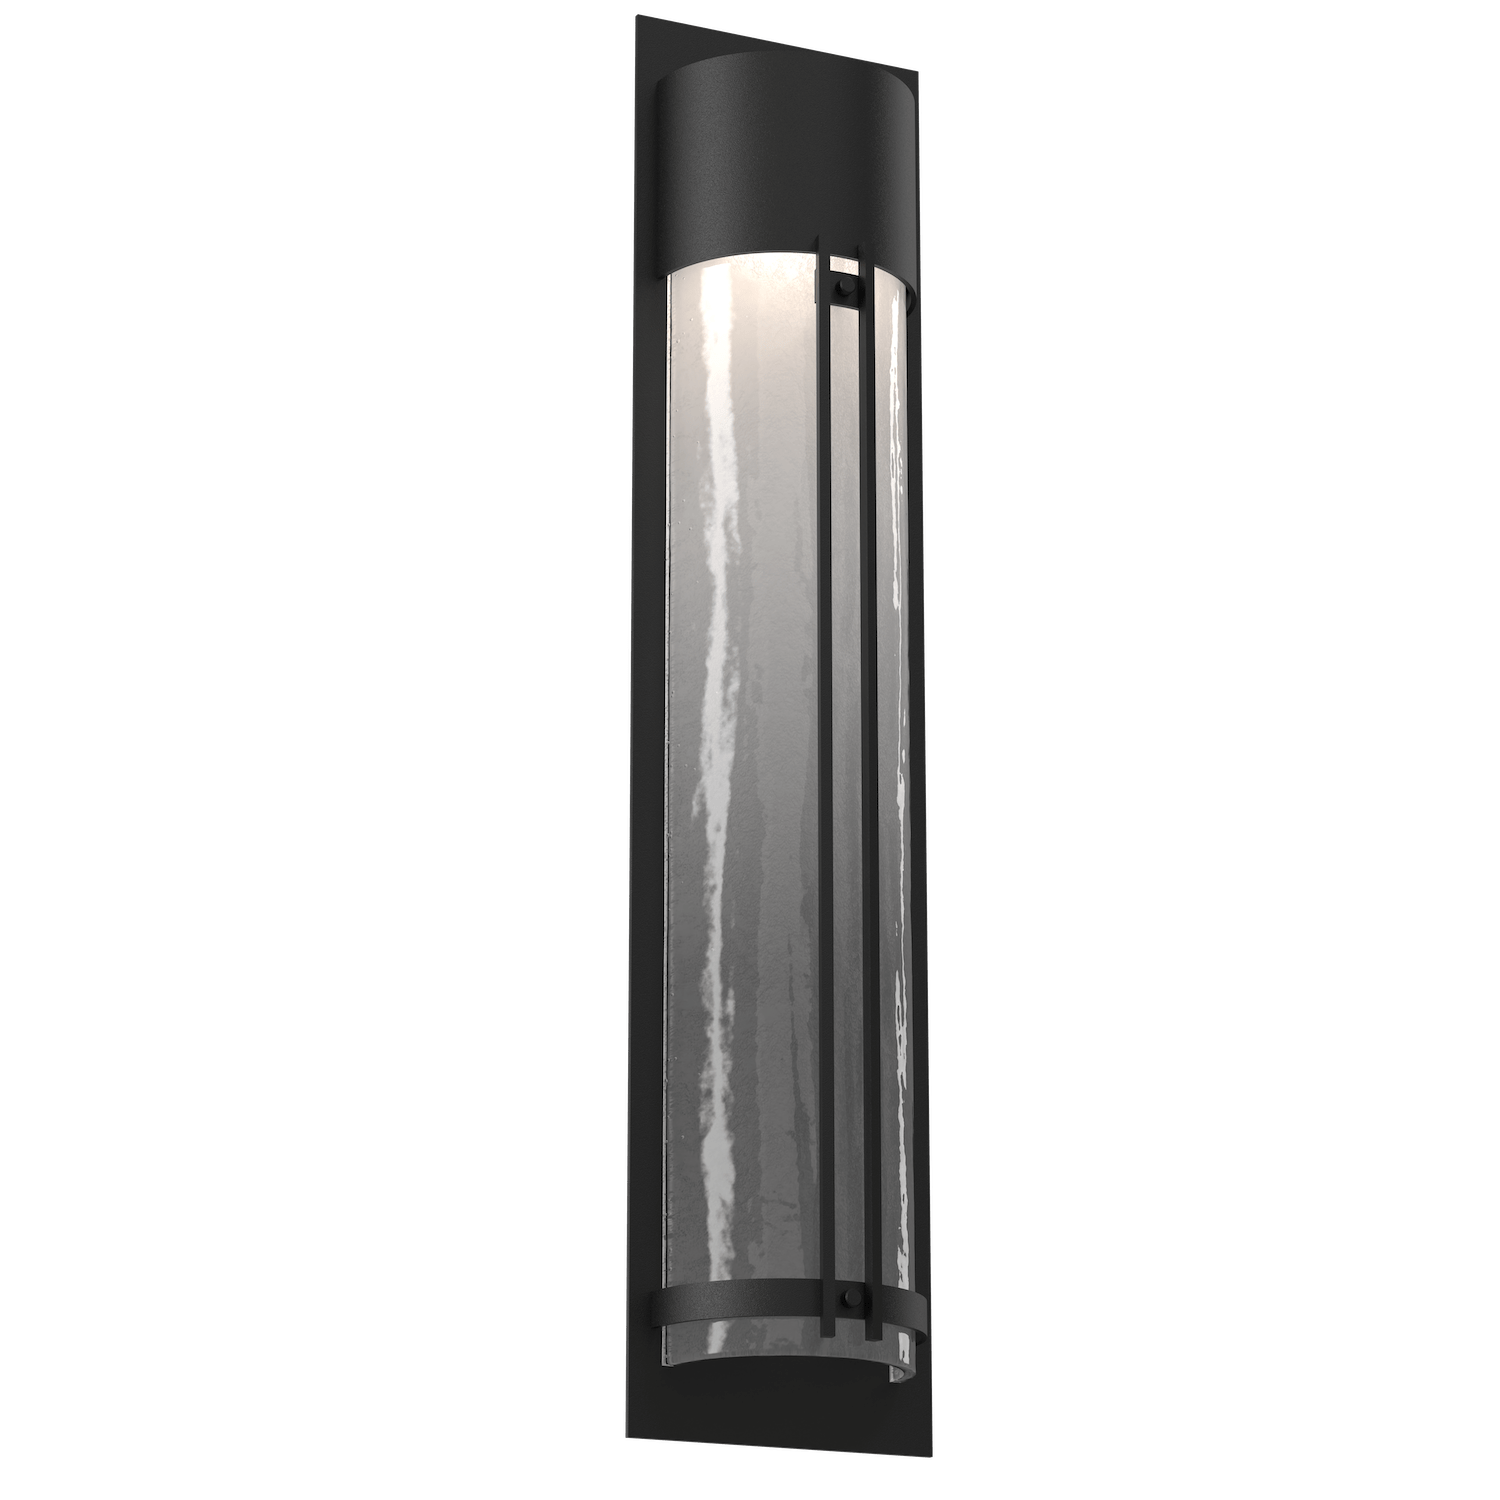 ODB0054-31-TB-FG-Hammerton-Studio-31-inch-outdoor-sconce-with-half-round-frosted-granite-glass-cover-with-textured-black-finish-and-LED-lamping